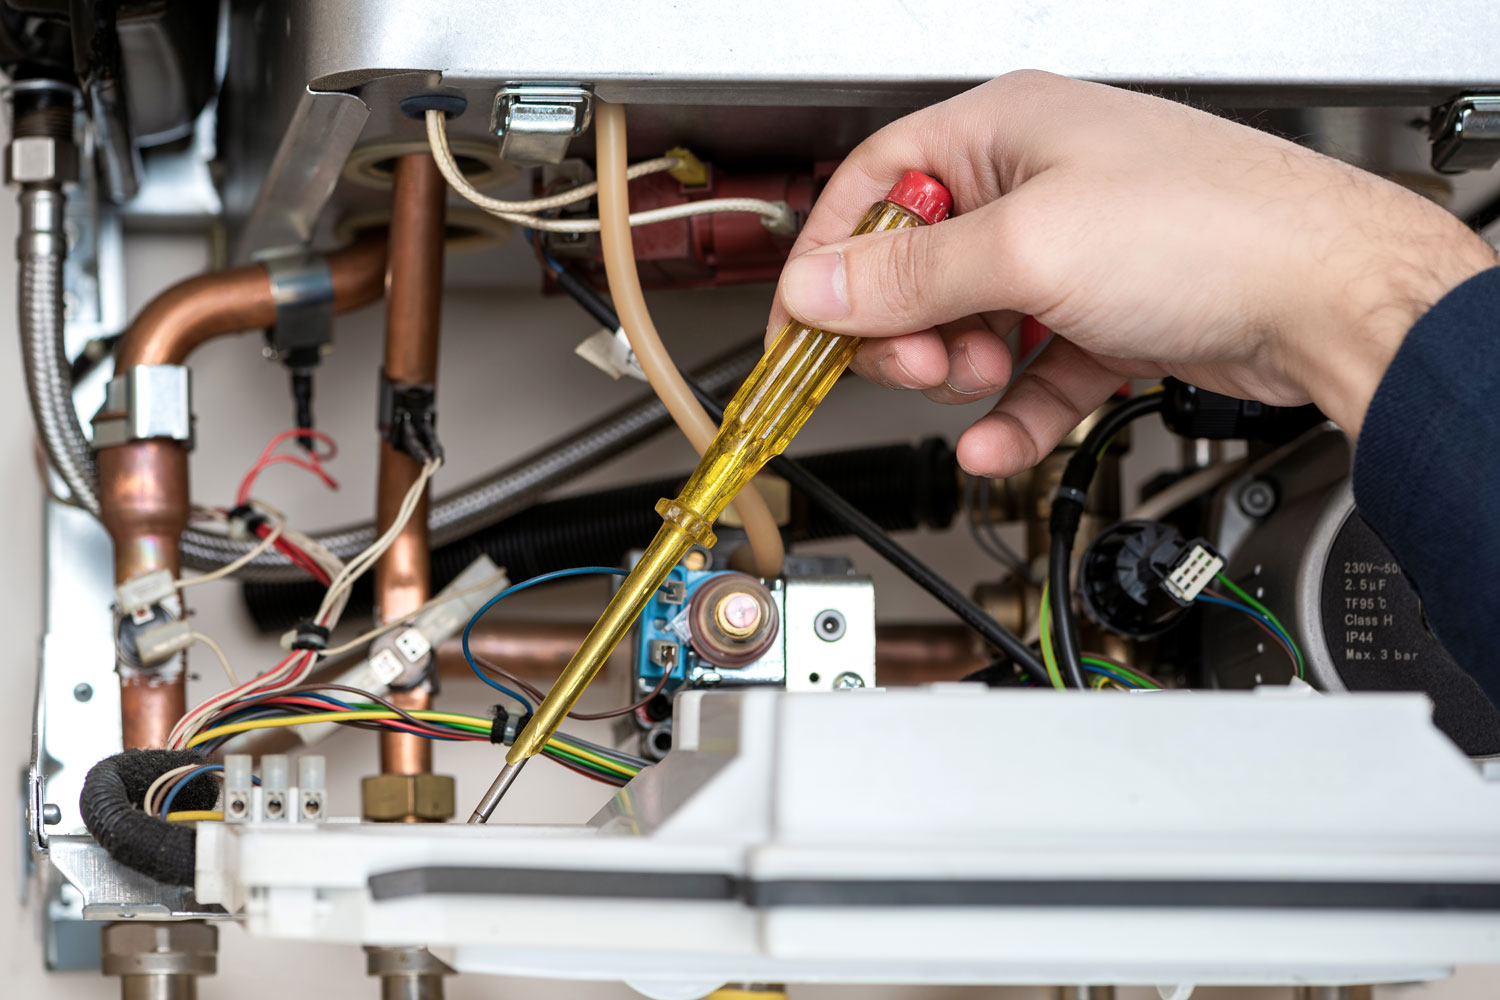 Understand the issue of the electric furnace by troubleshooting